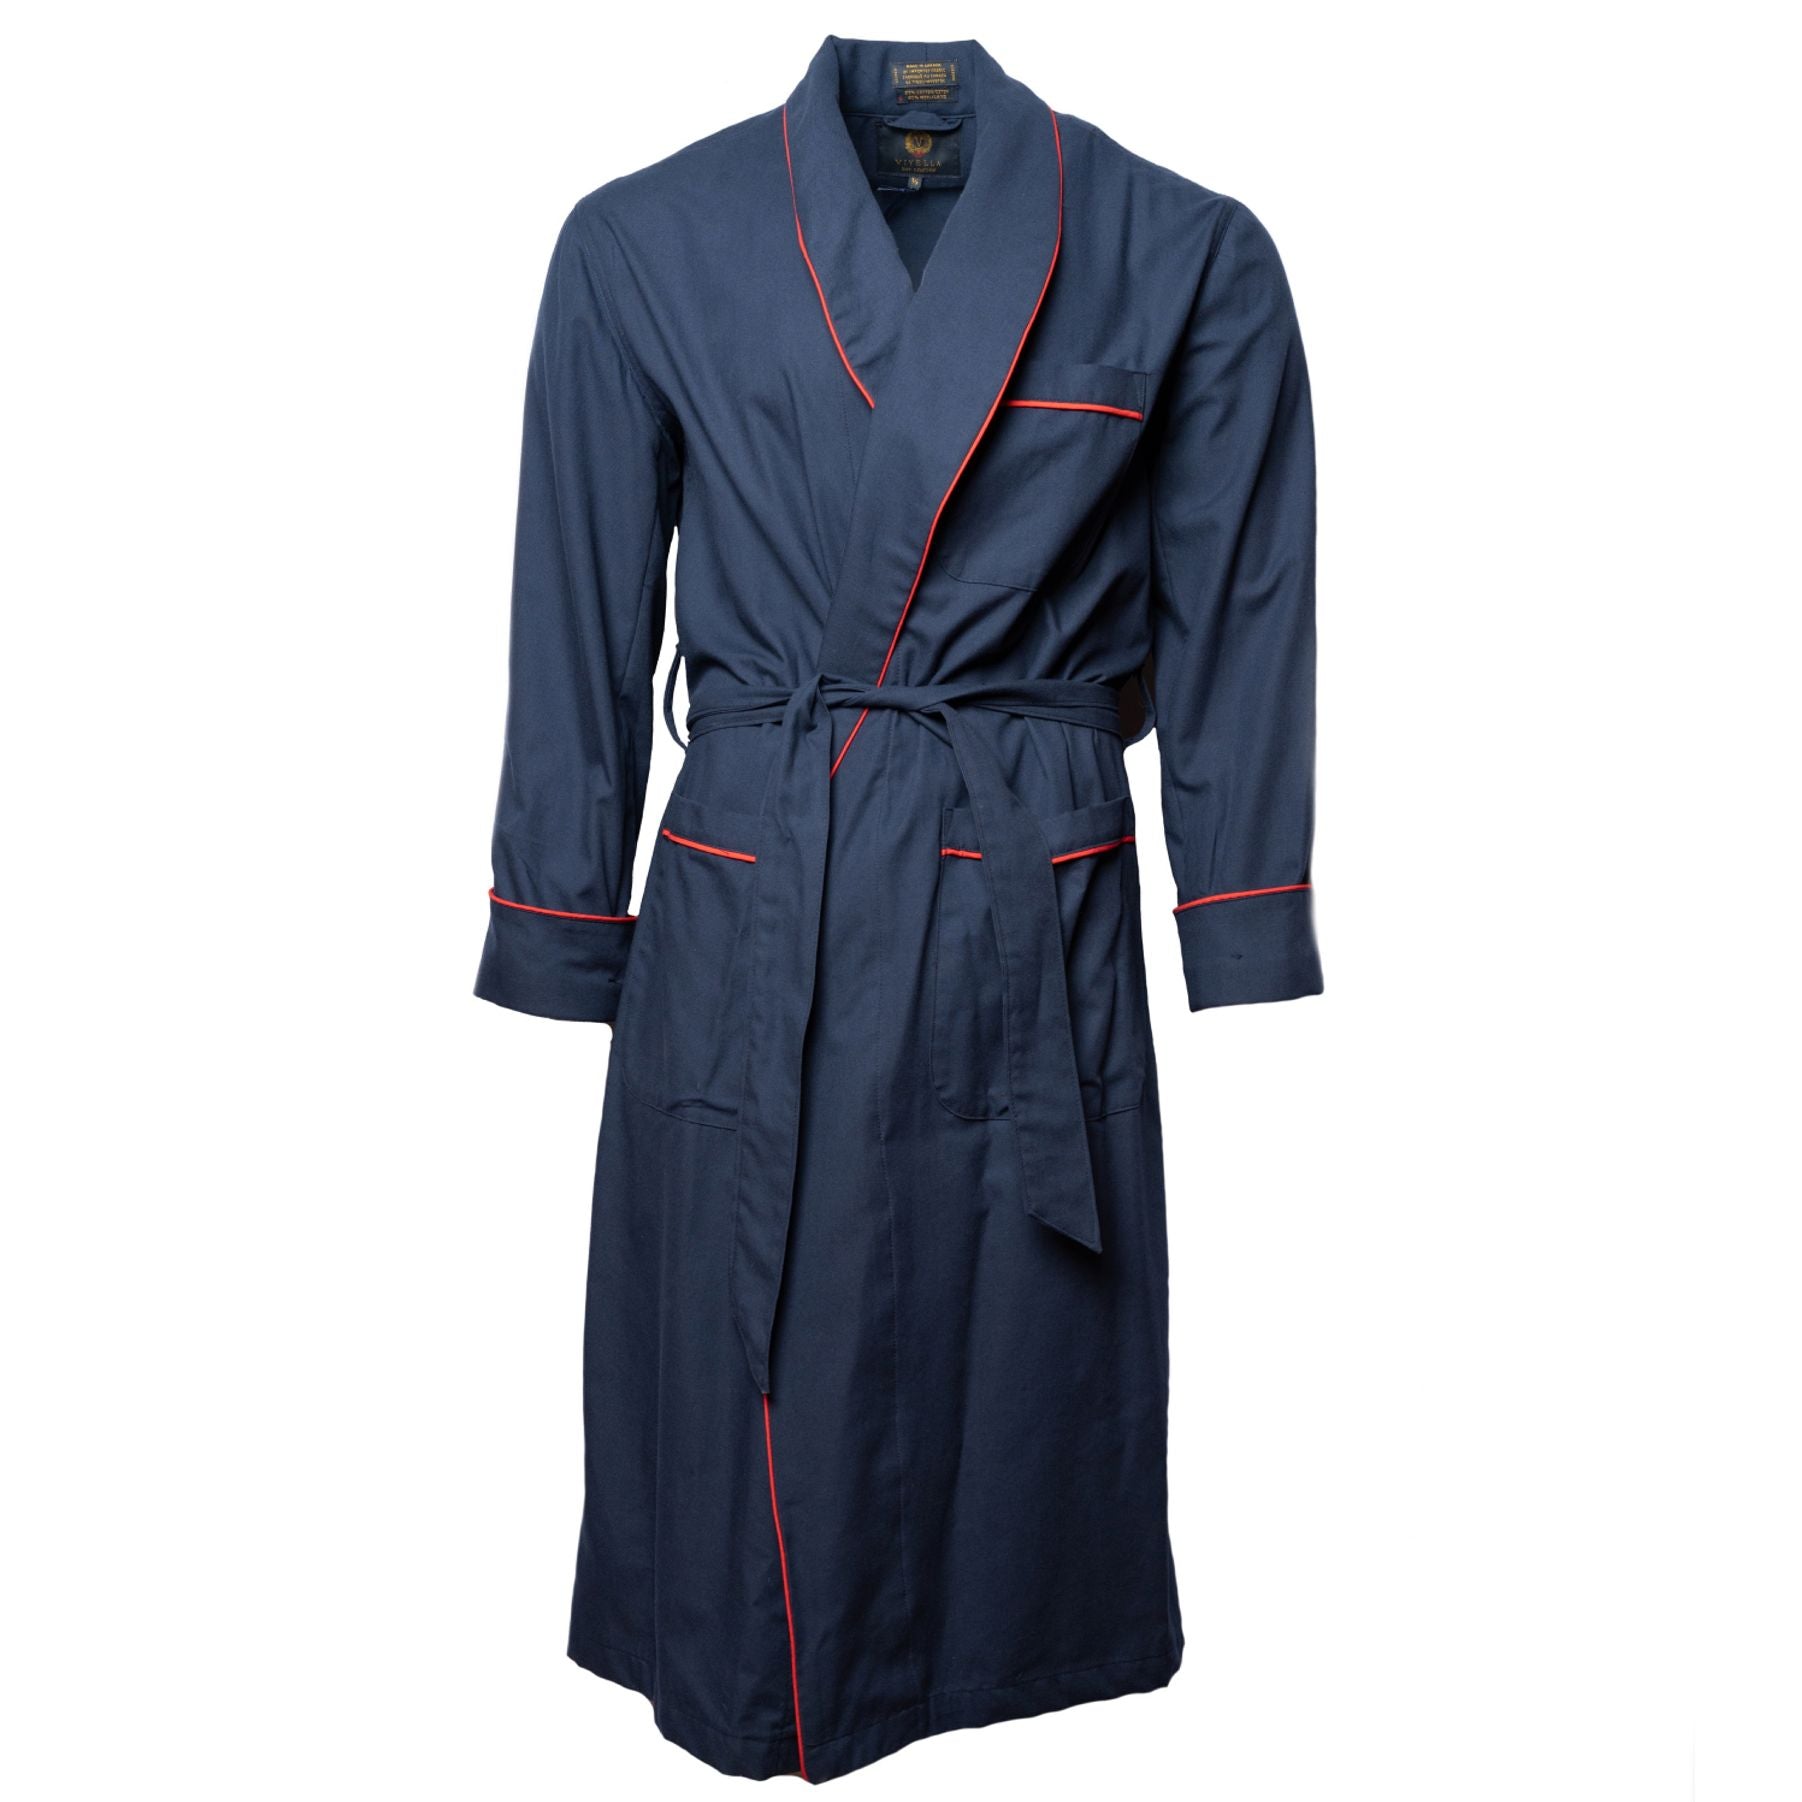 Gentleman's Cotton and Wool Blend Robe in Solid Navy with Red Piping by Viyella